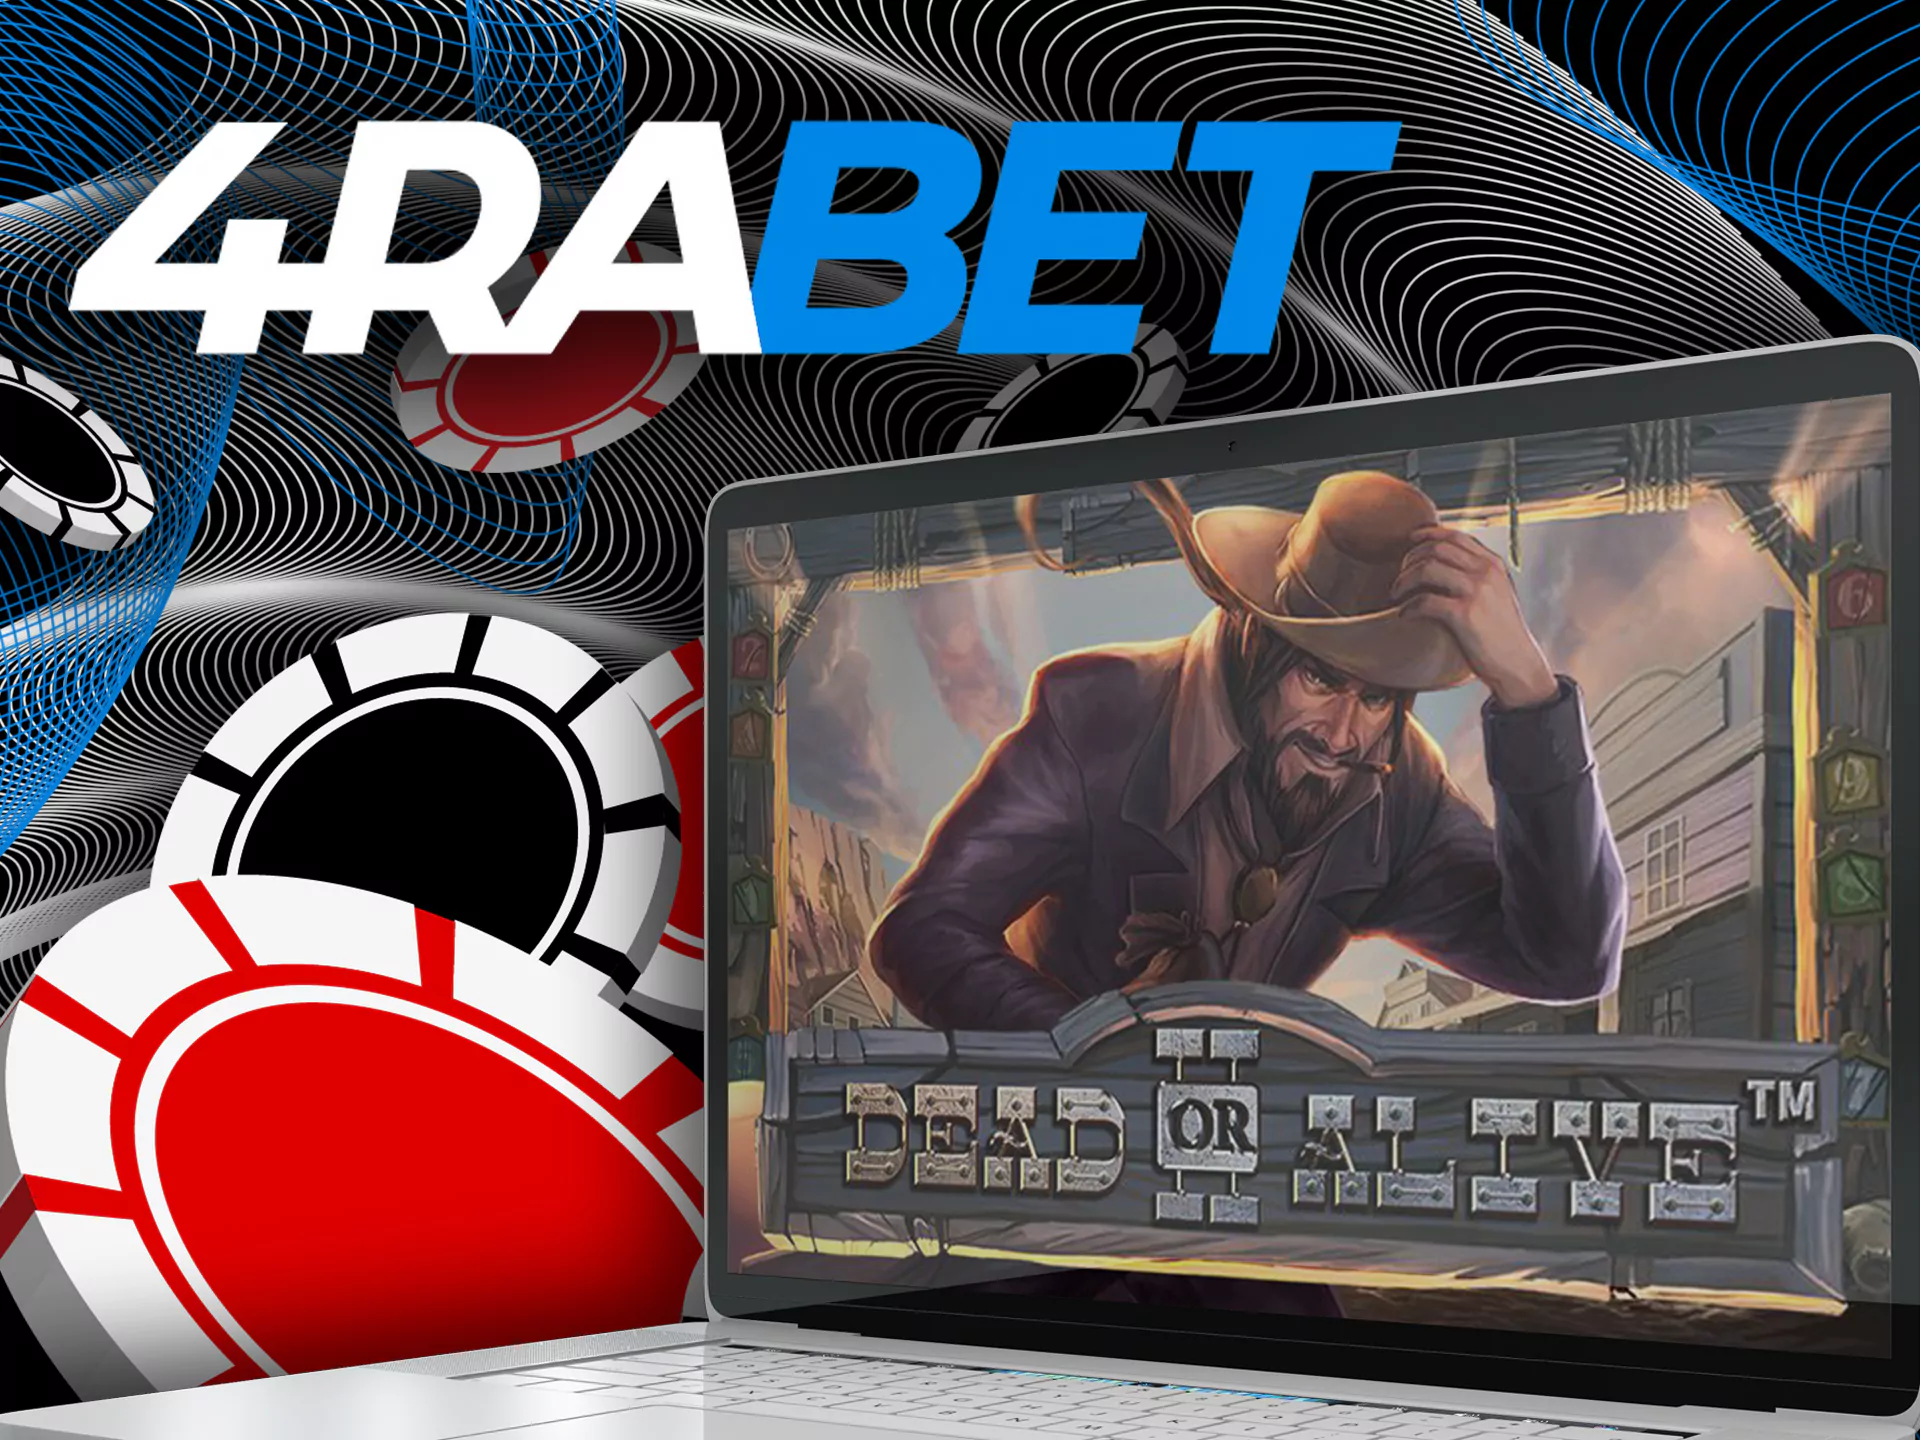 Dead or Alive 2 — one of the most best Casino game at 4rabet Bookie.